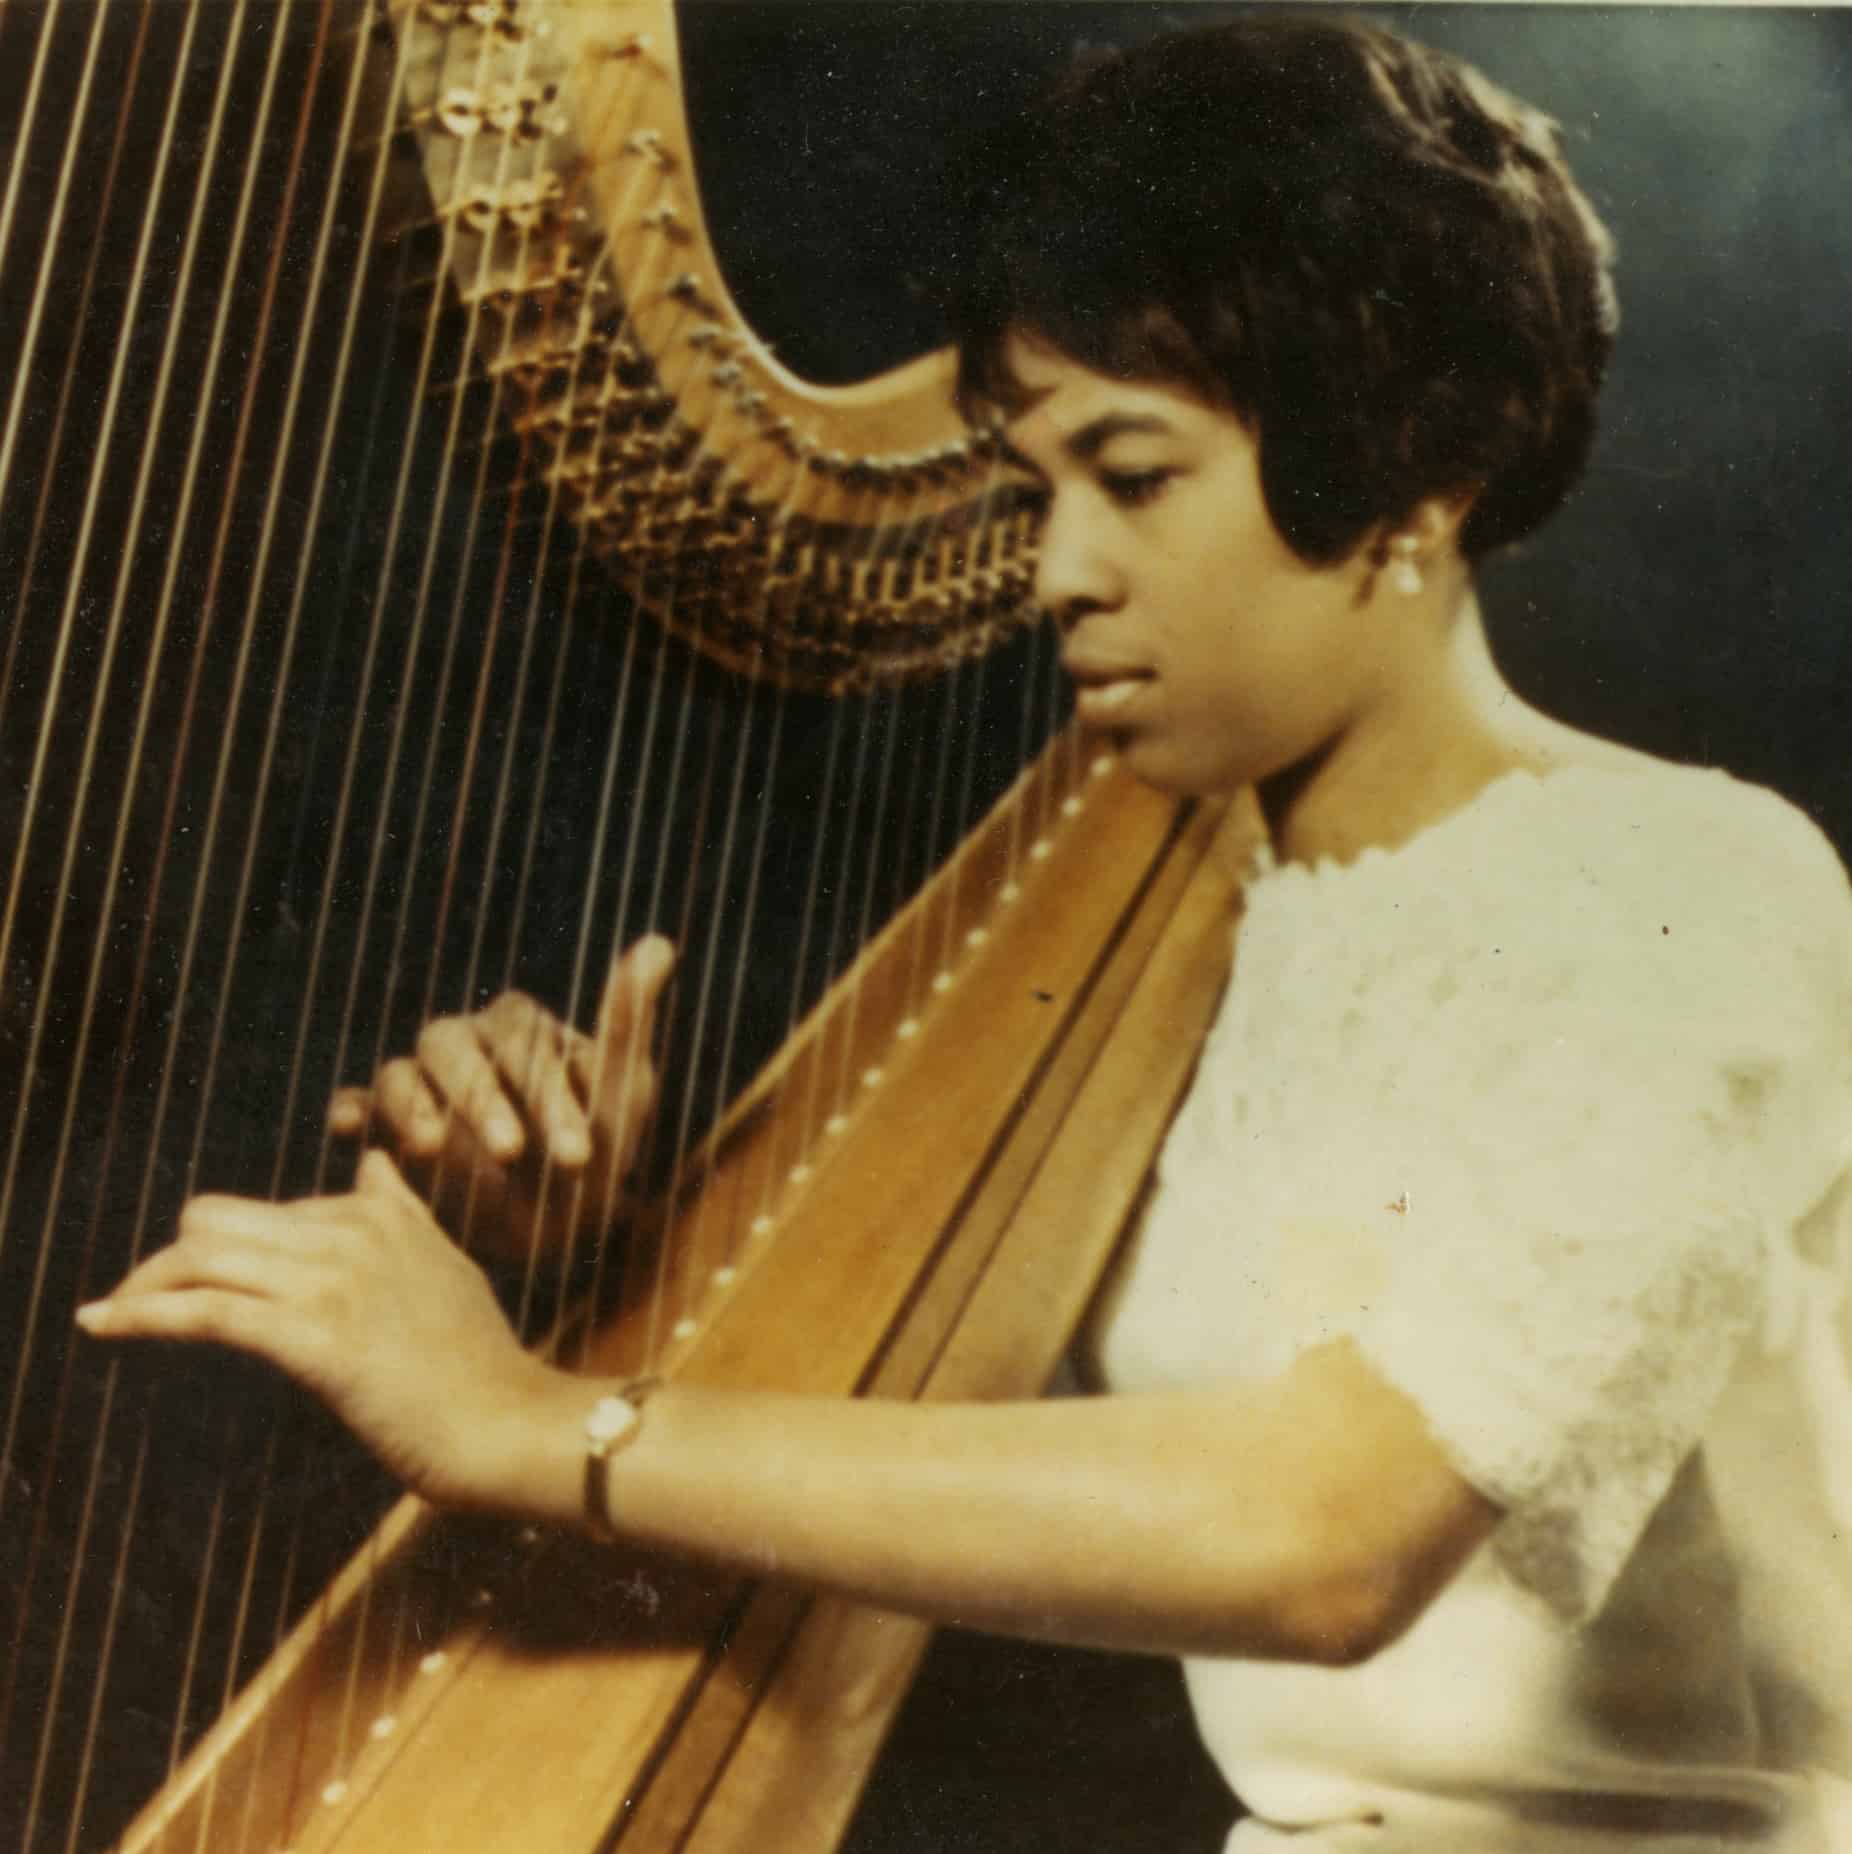 Ann Hobson Pilot performs as harpist with the Boston Symphony Orchestra in the 1970s.